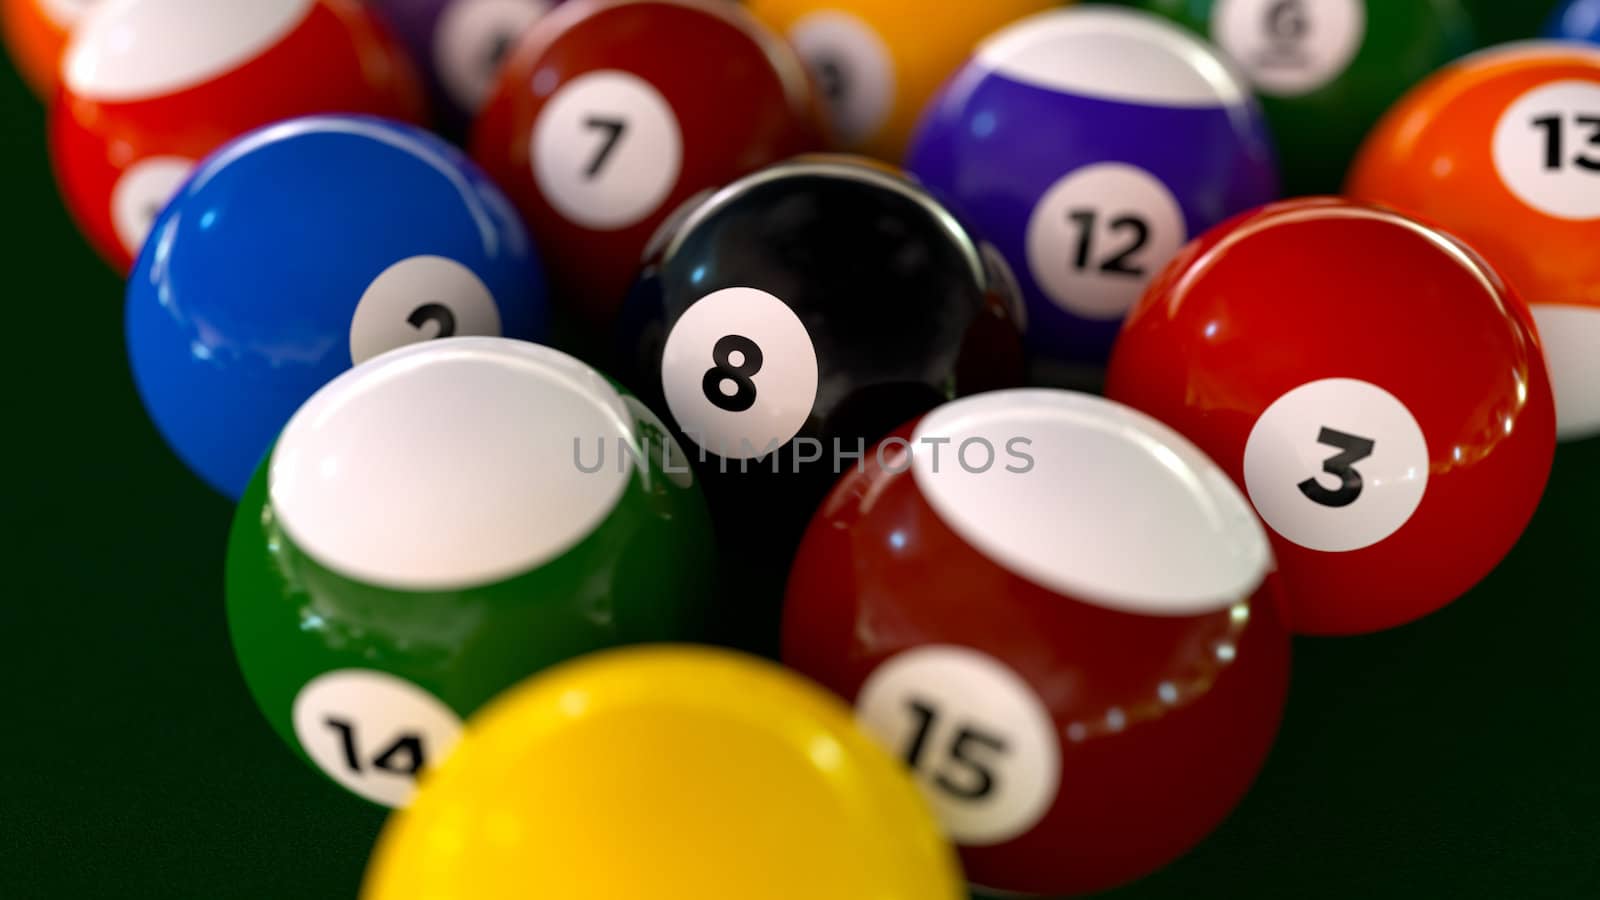 A set of racked pool balls on a table with selective focus on the 8 ball in the center.